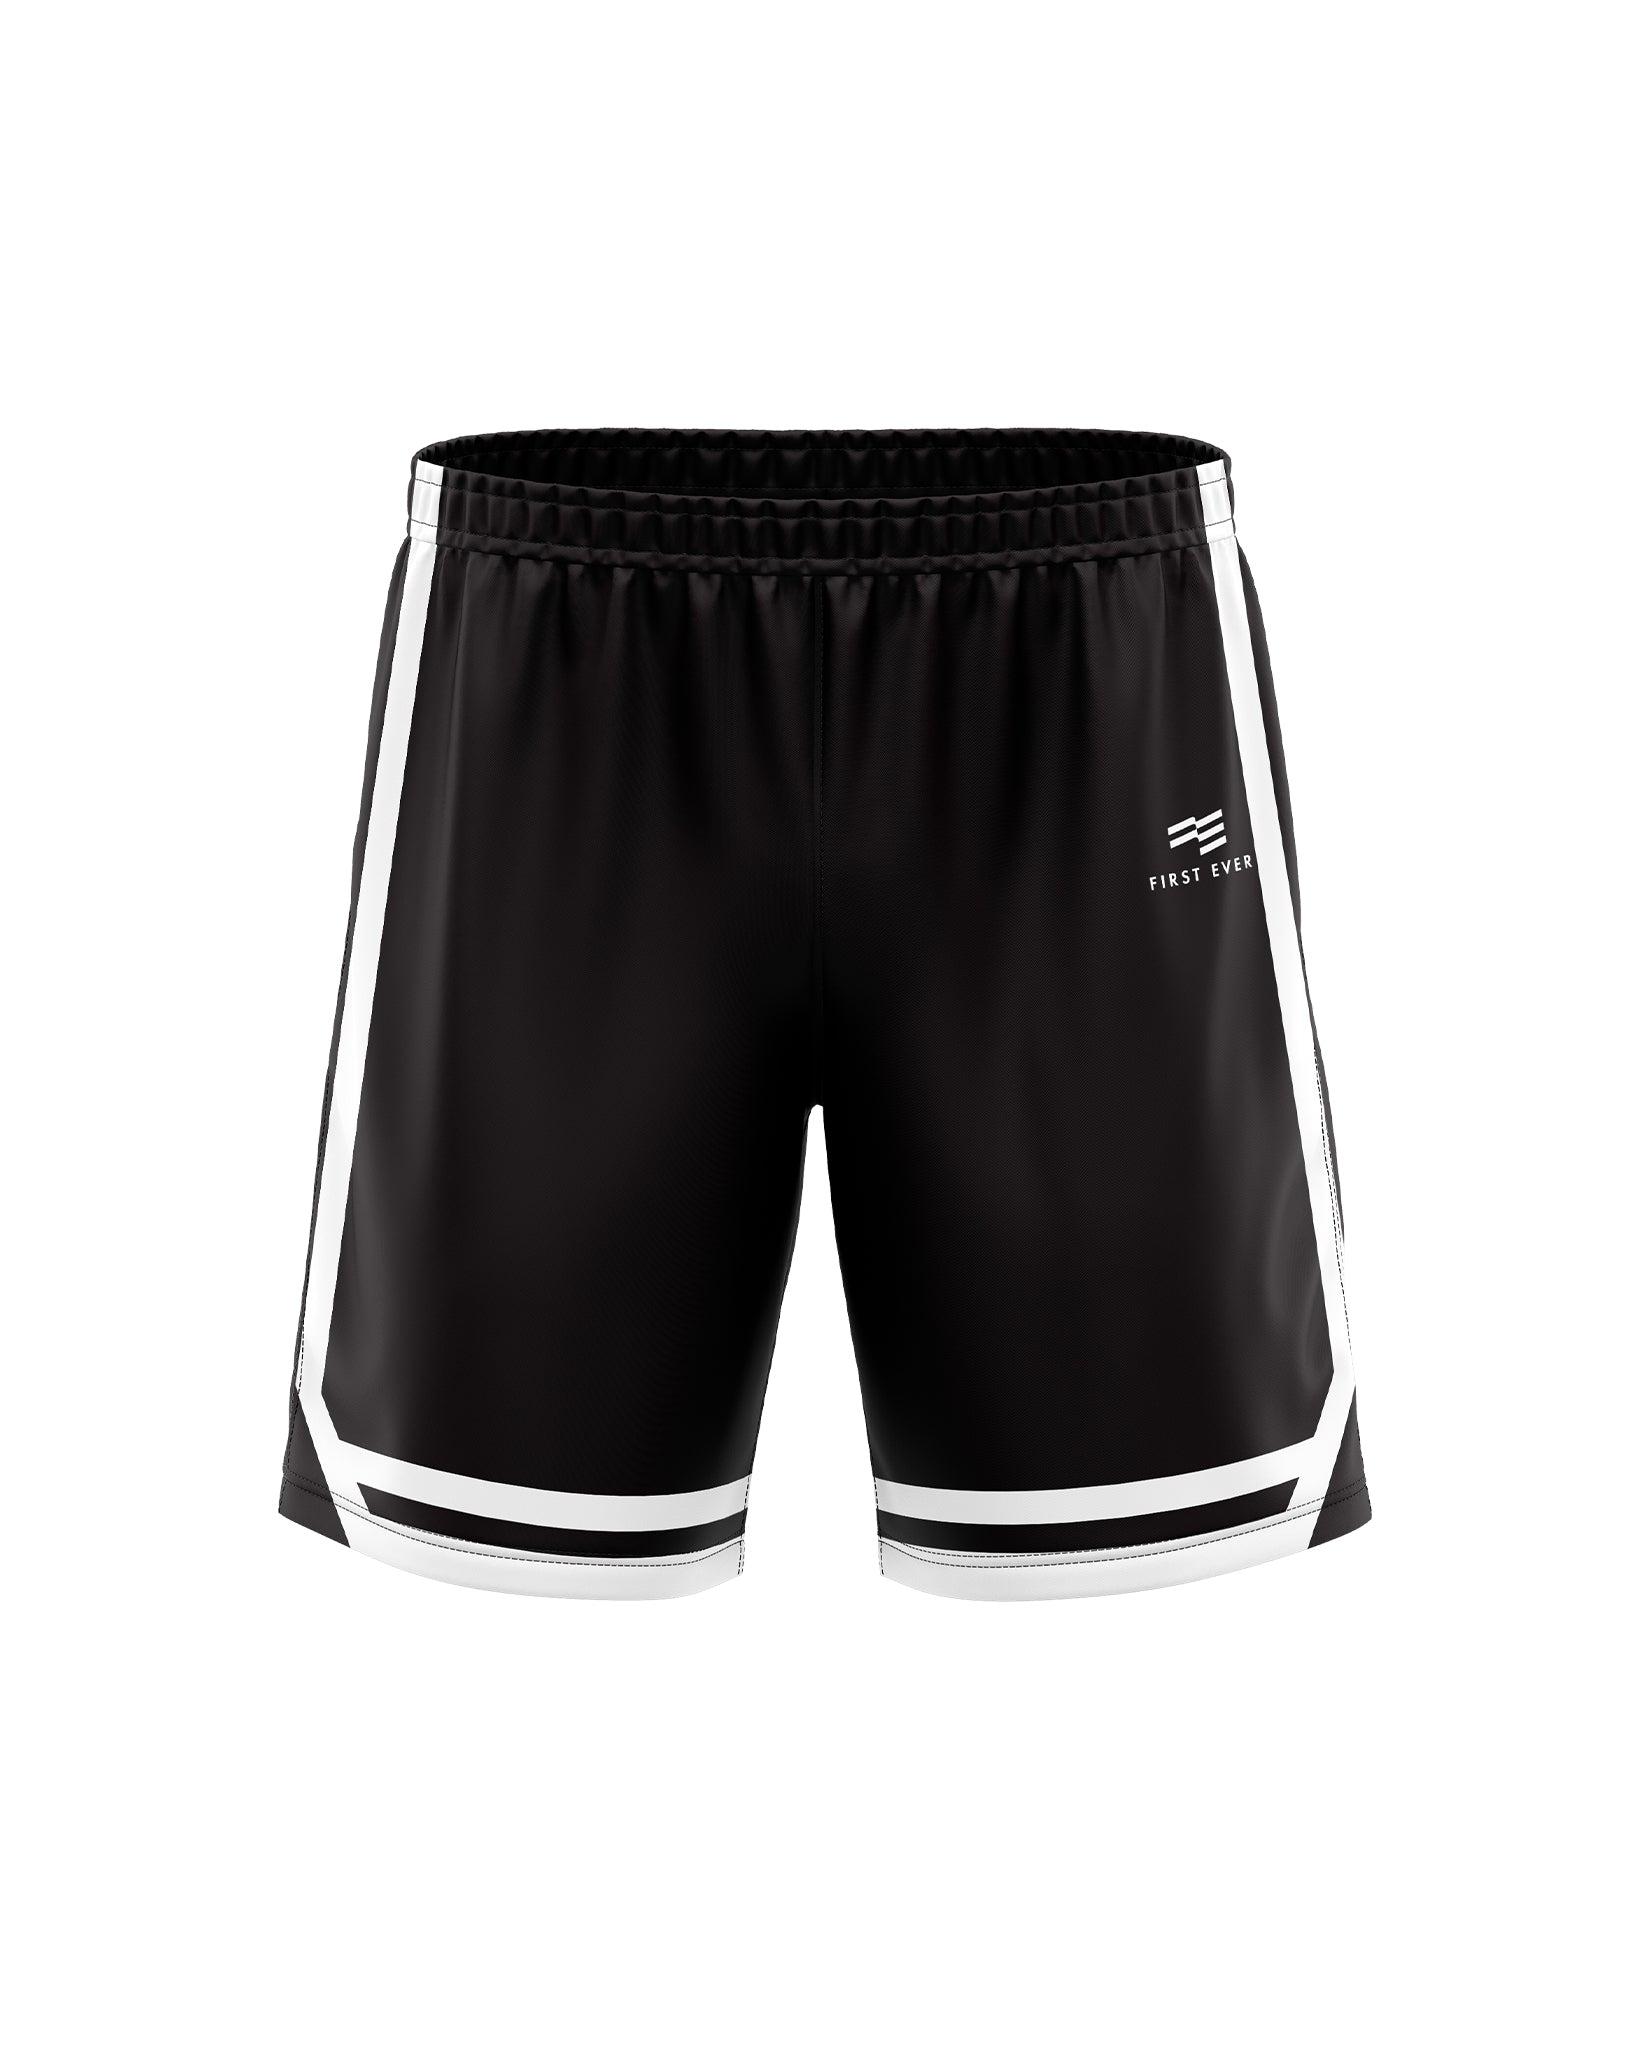 NBA Official Shorts for Men and Women – Kiwi Jersey Co.